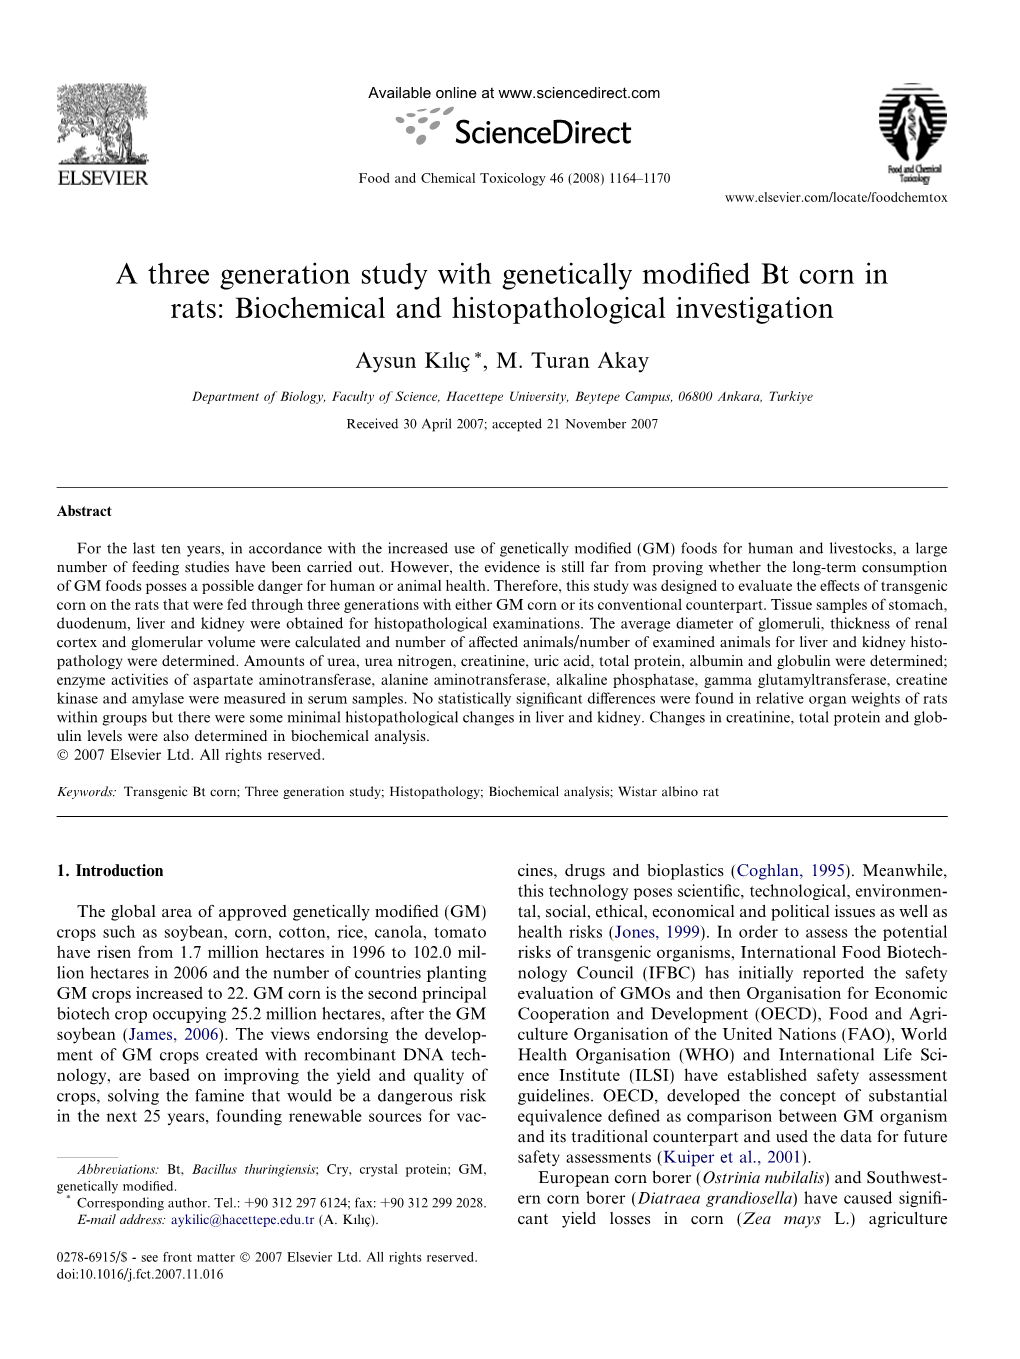 A Three Generation Study with Genetically Modified Bt Corn in Rats